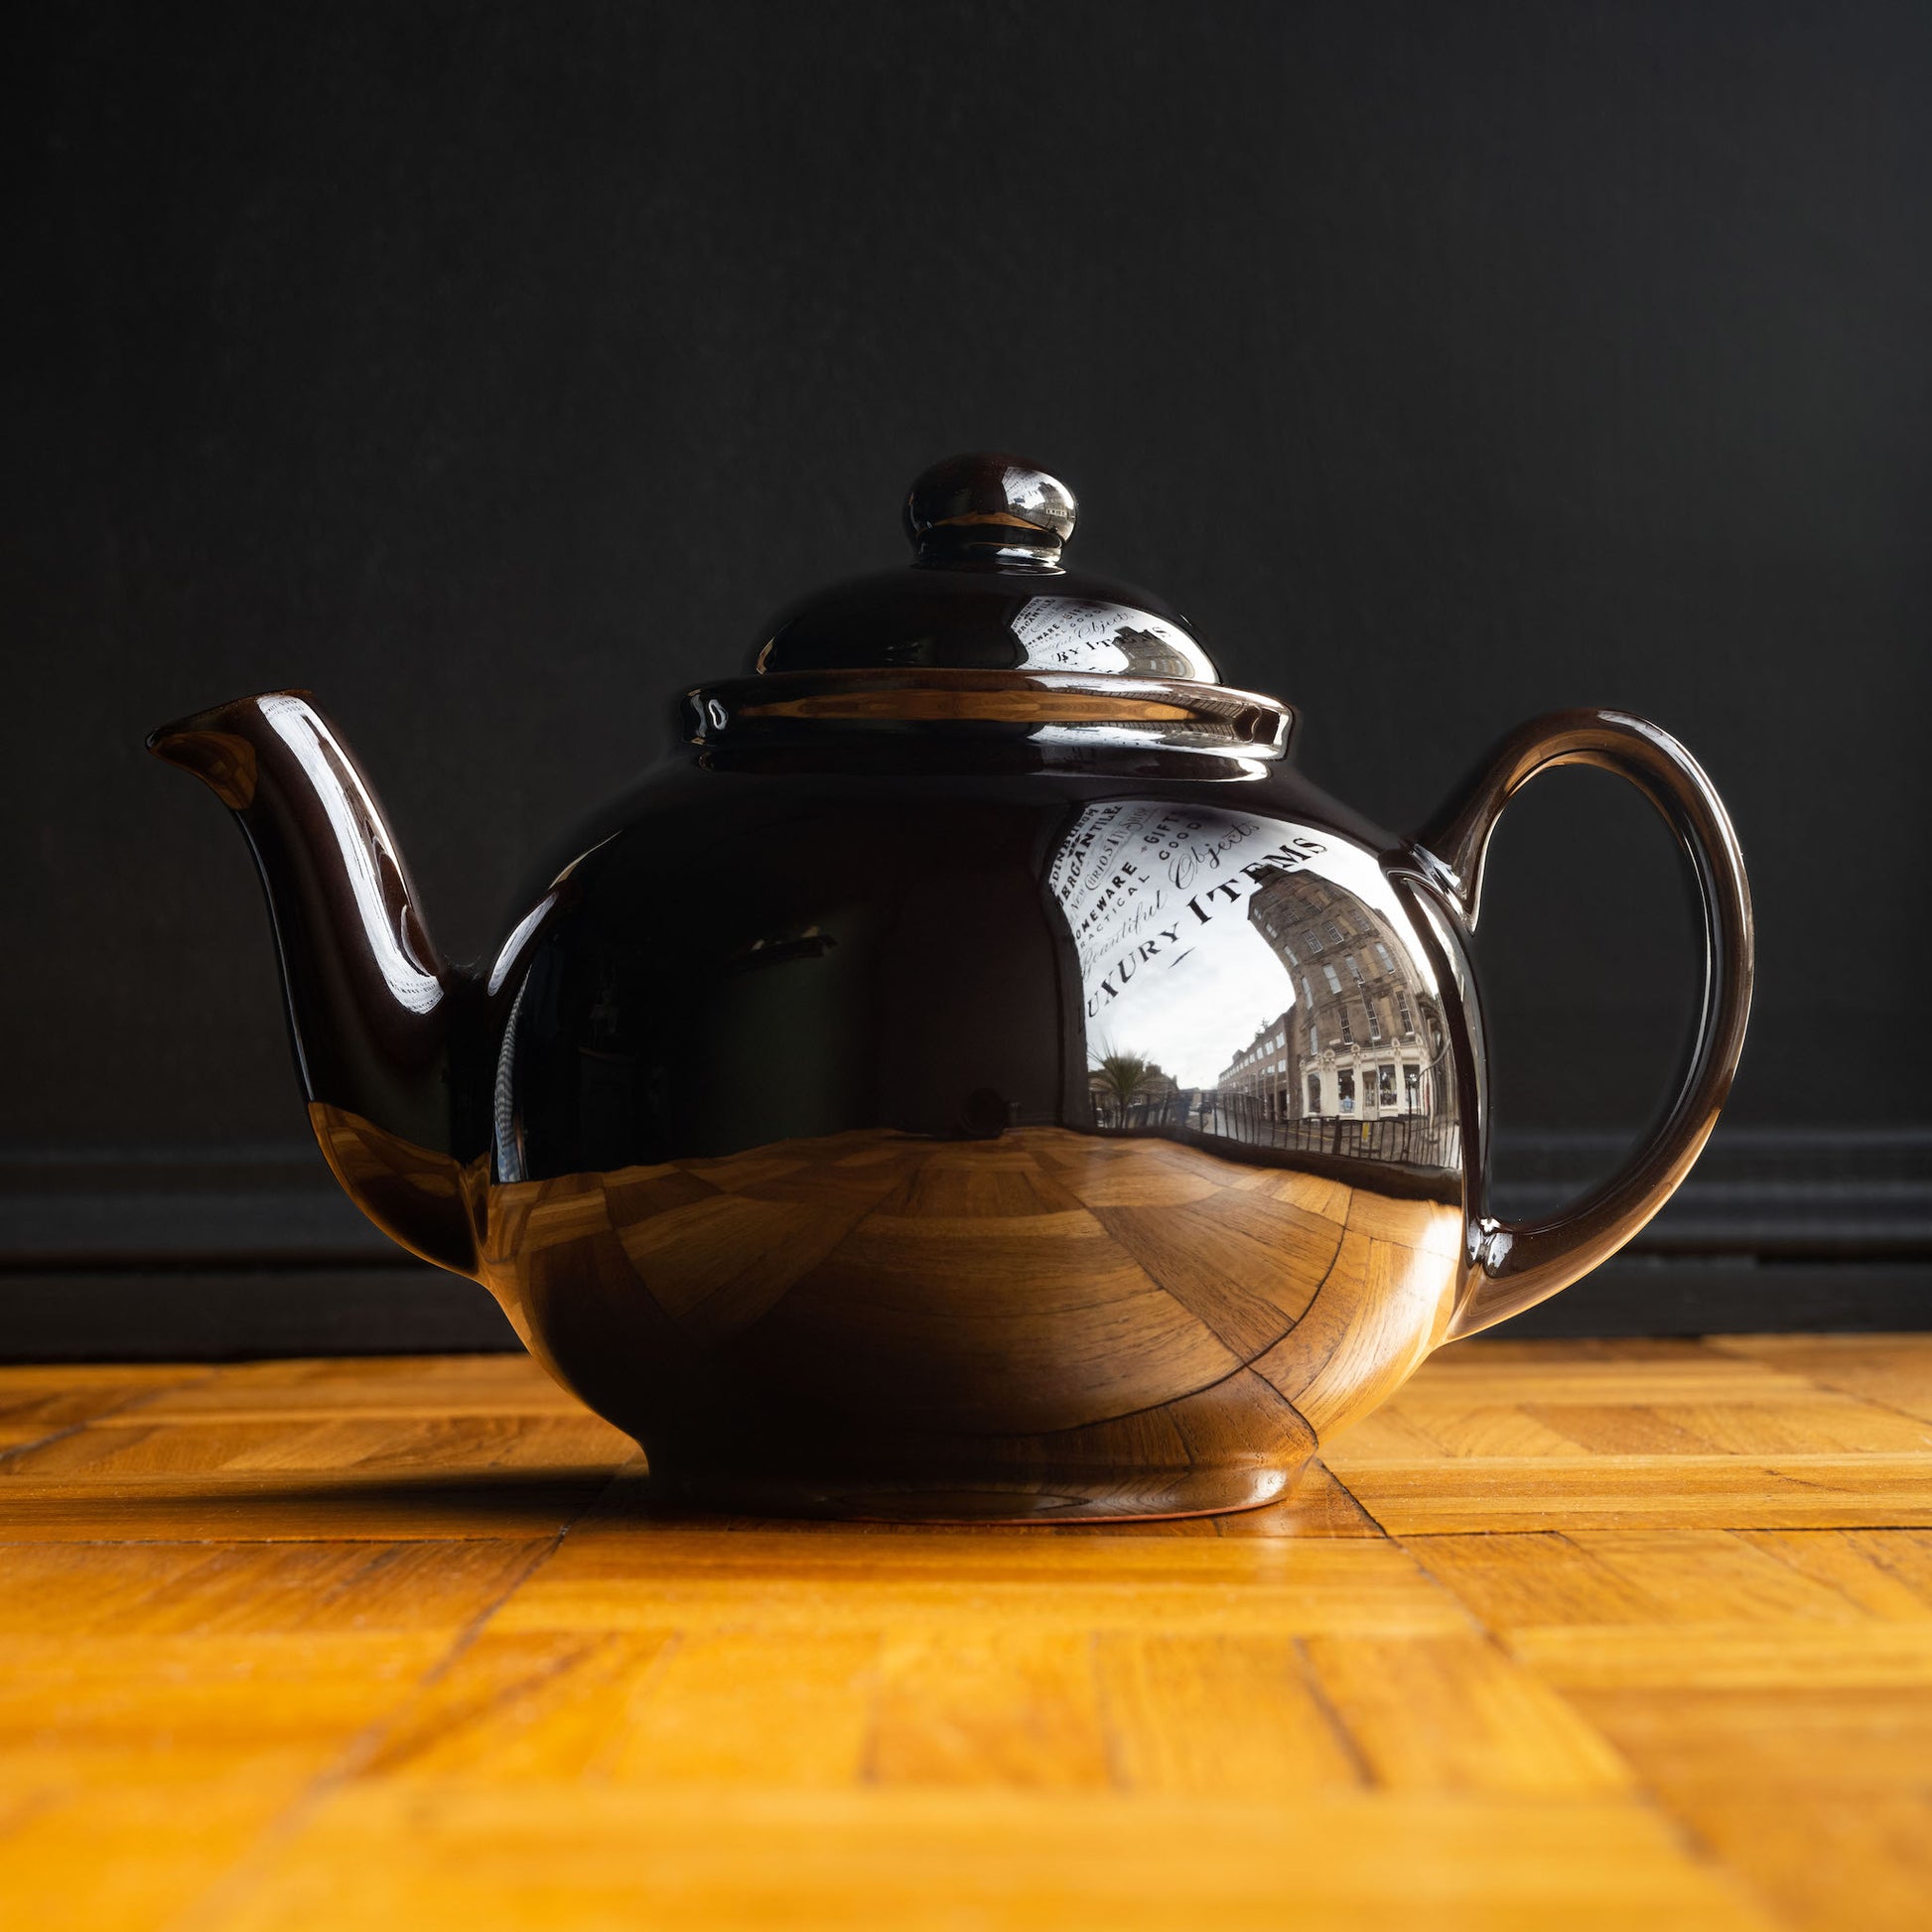 Brown Betty teapot 6 cup size